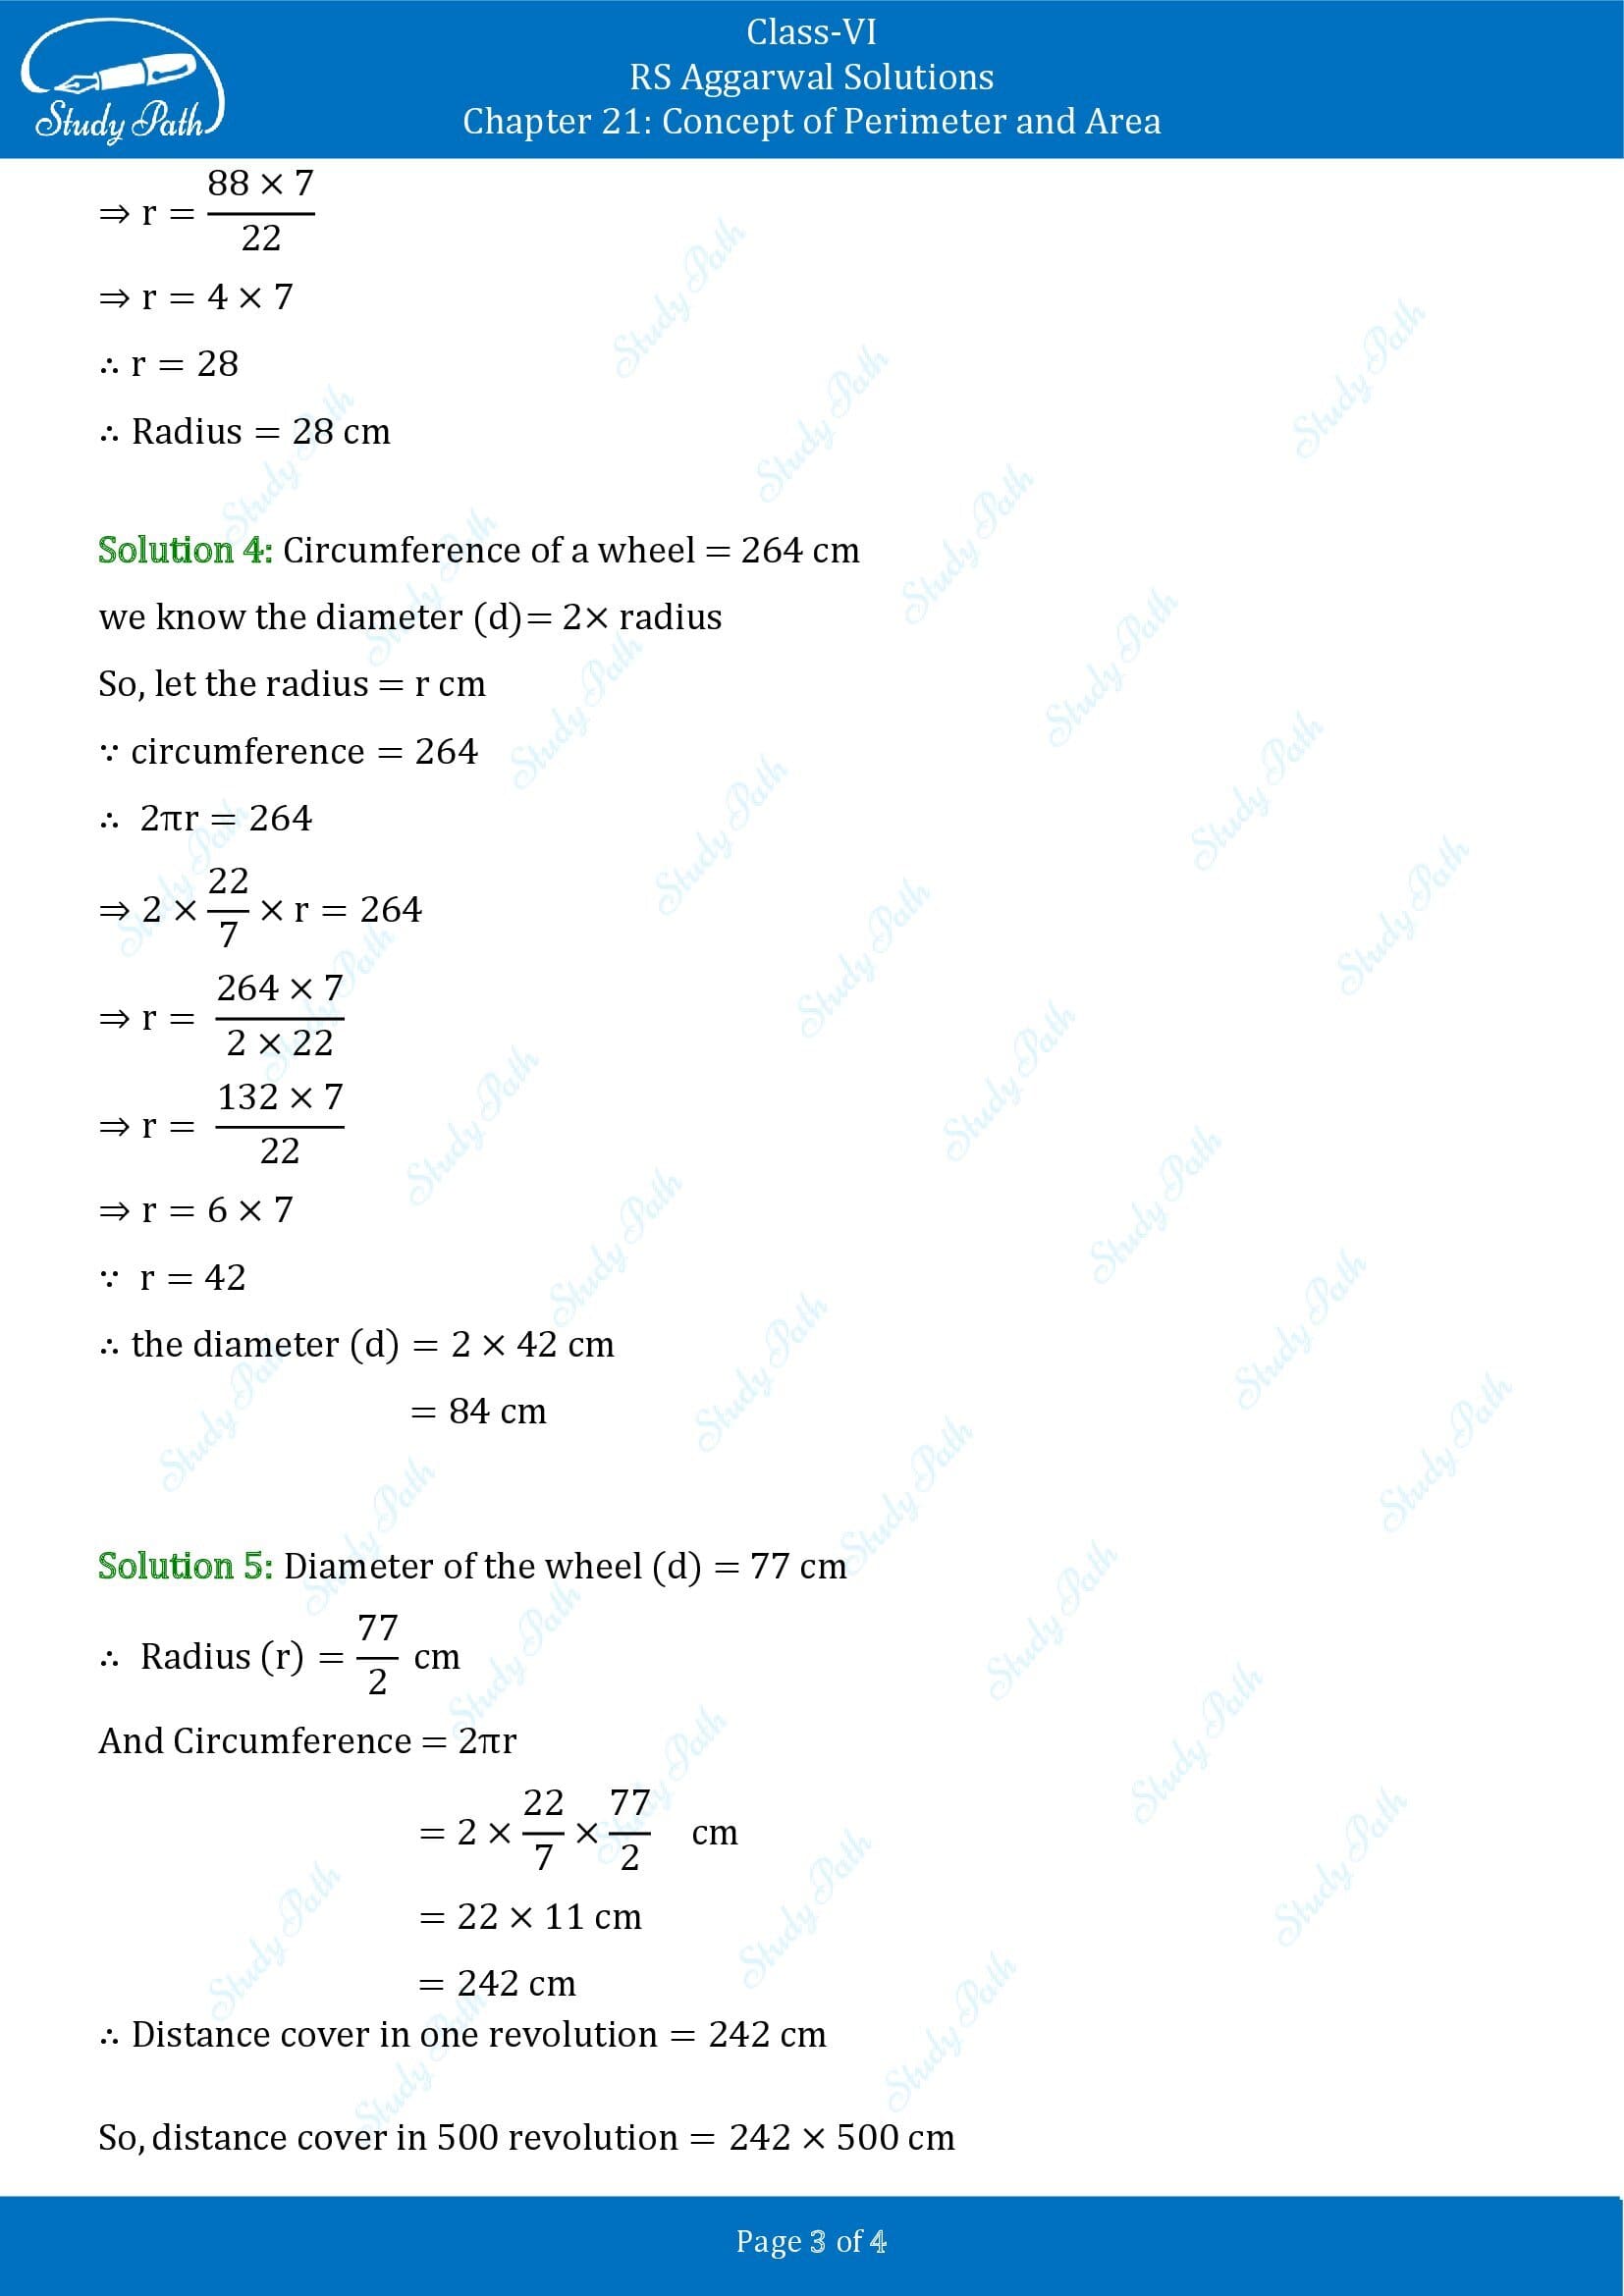 RS Aggarwal Solutions Class 6 Chapter 21 Concept of Perimeter and Area Exercise 21B 00003